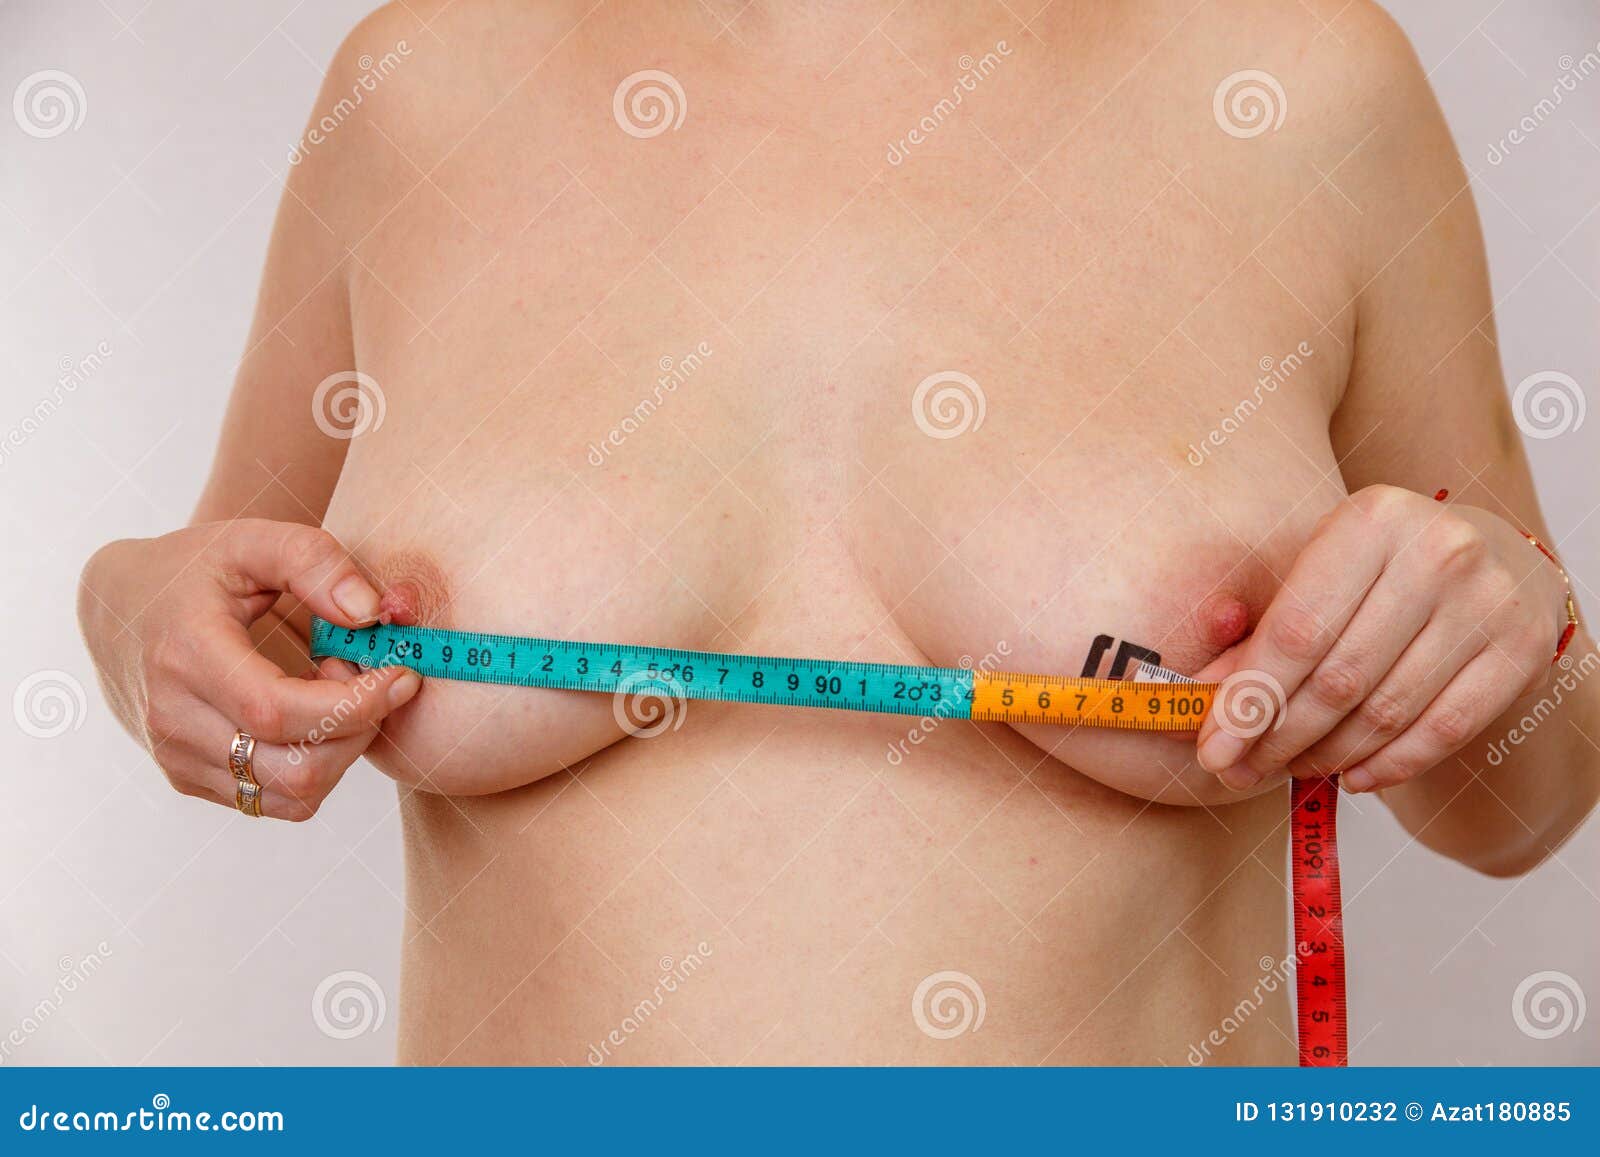 Naked 30 years old lady boobs A 30 Year Old Naked Caucasian Woman Measuring Her Breast On A White Isolated Background Concept For Medicine And Cosmetology Stock Photo Image Of Concept Naked 131910232